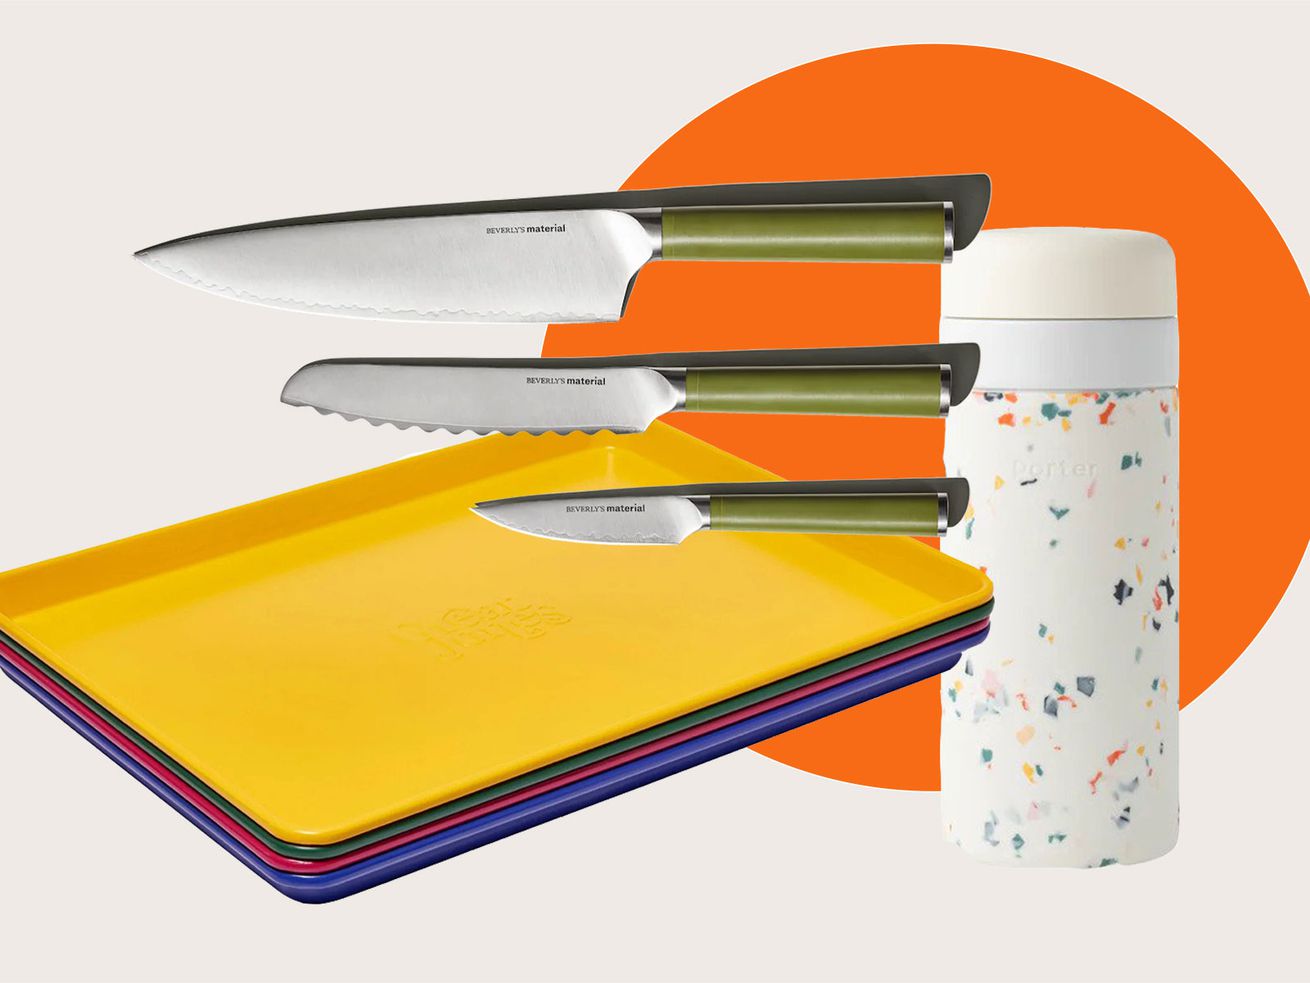 A trio of knives, stacked sheet pans in various colors, and an insulated cup